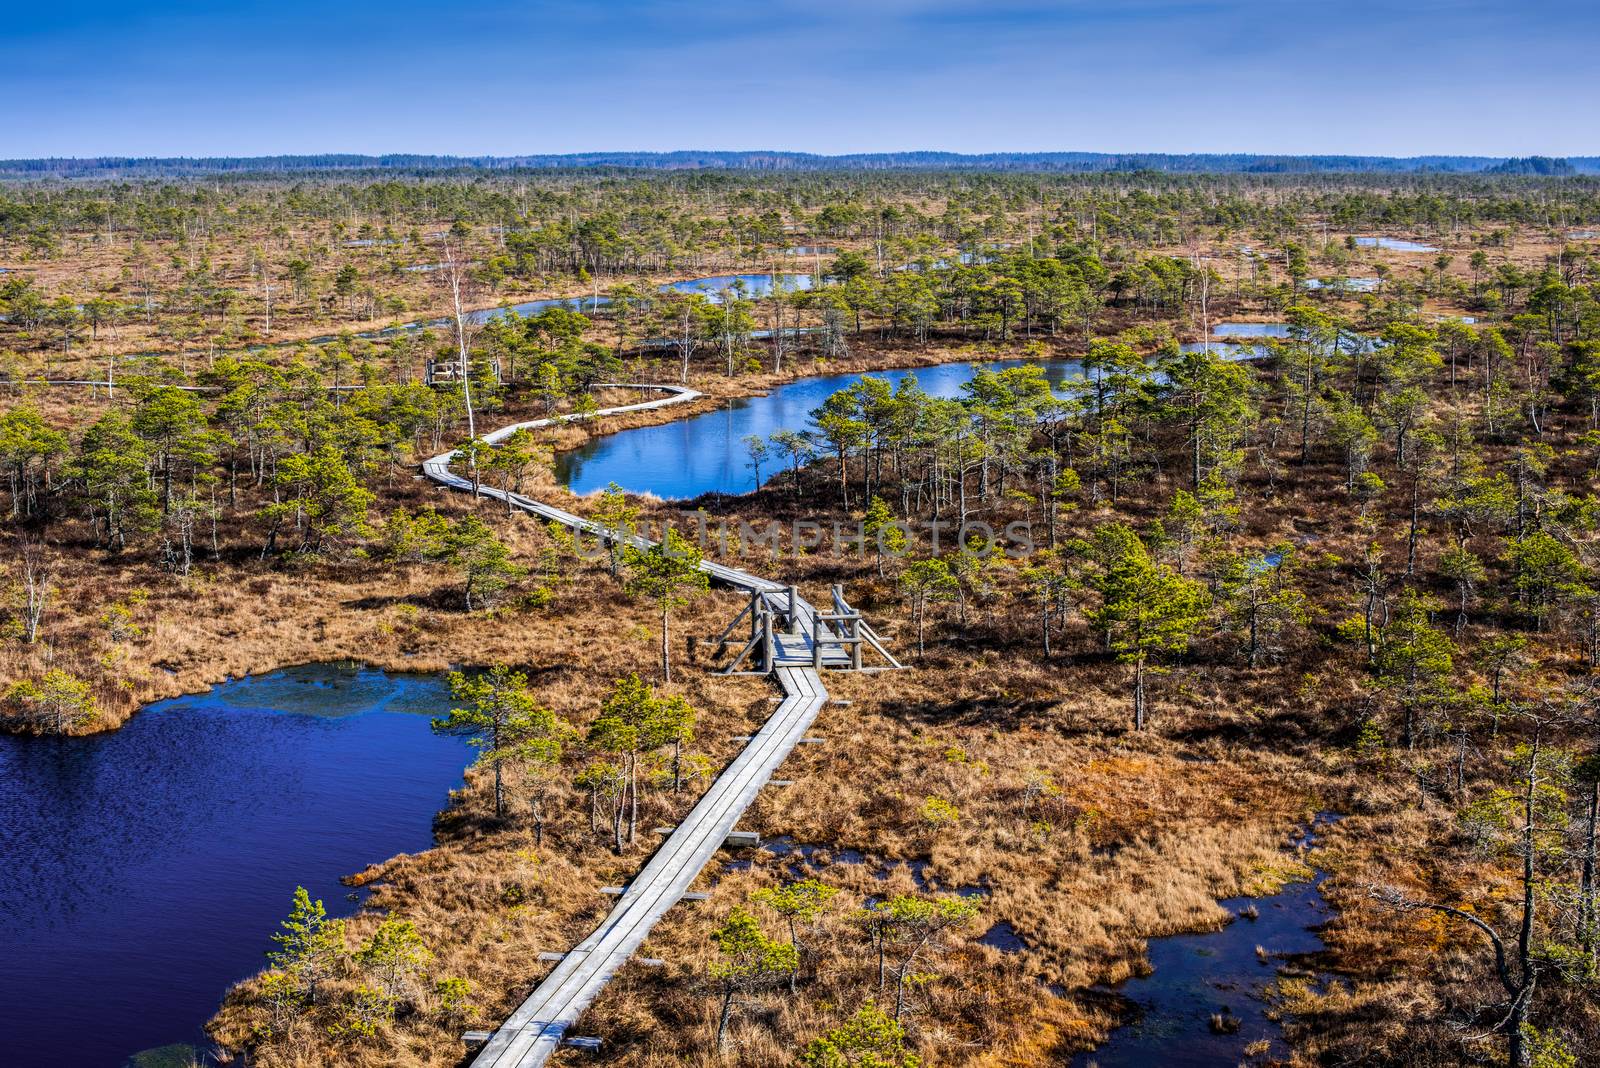 Swamp or bog in Kemeri National park with blue reflection lakes, wooden path, green trees and blue sky (Riga area, Latvia, Europe)